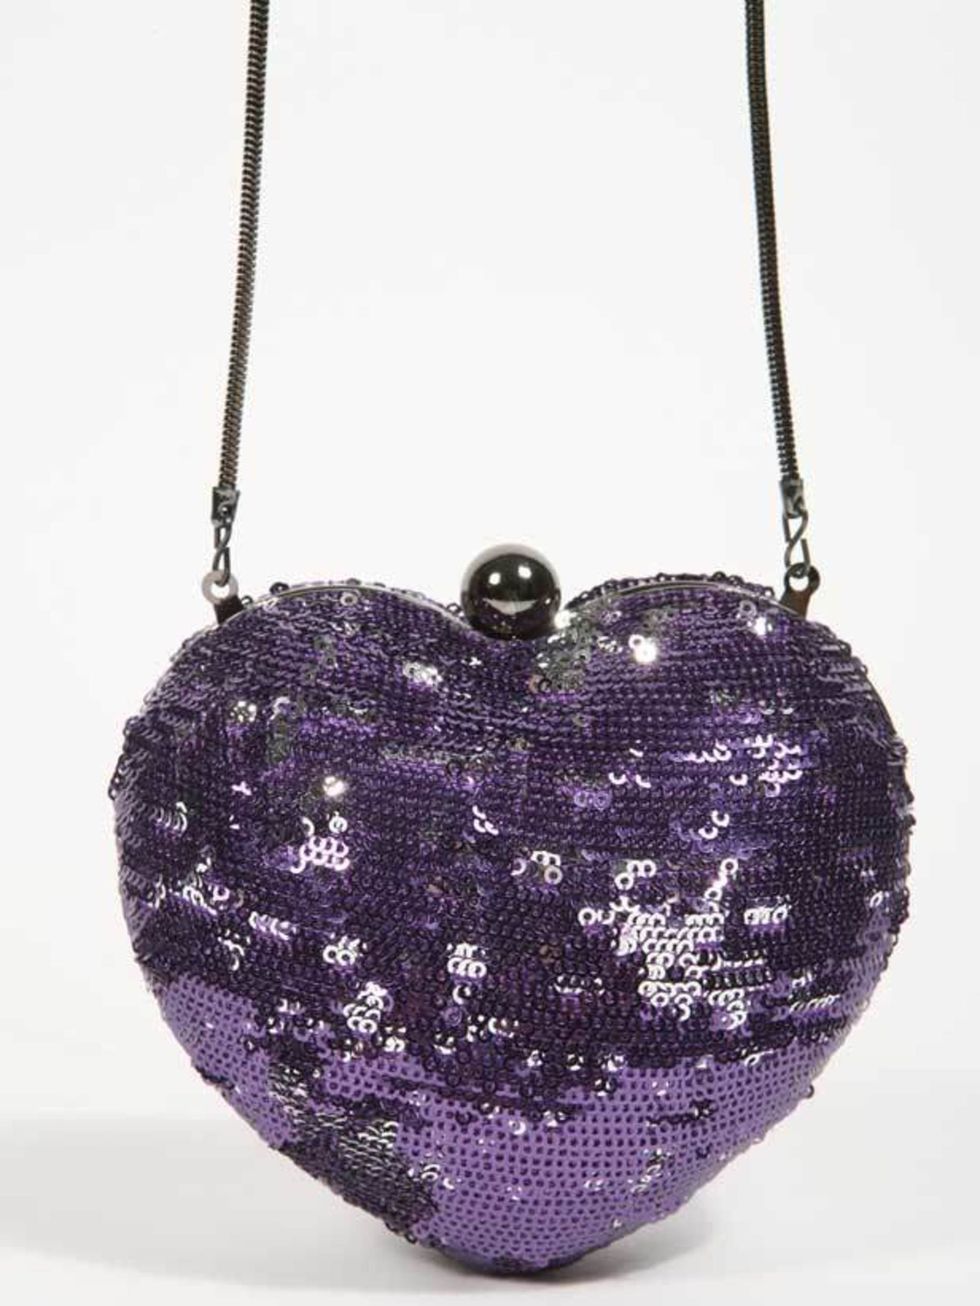 <p>Sequin heart box bag, £32, by <a href="http://www.urbanoutfitters.co.uk/Sequin-Heart-Box-Purse/invt/5770460253256&amp;bklist?cm_mmc=AffWin-_-Winter09-_-ShopStyle%20UK-_-null">Urban Outfitters</a> </p>